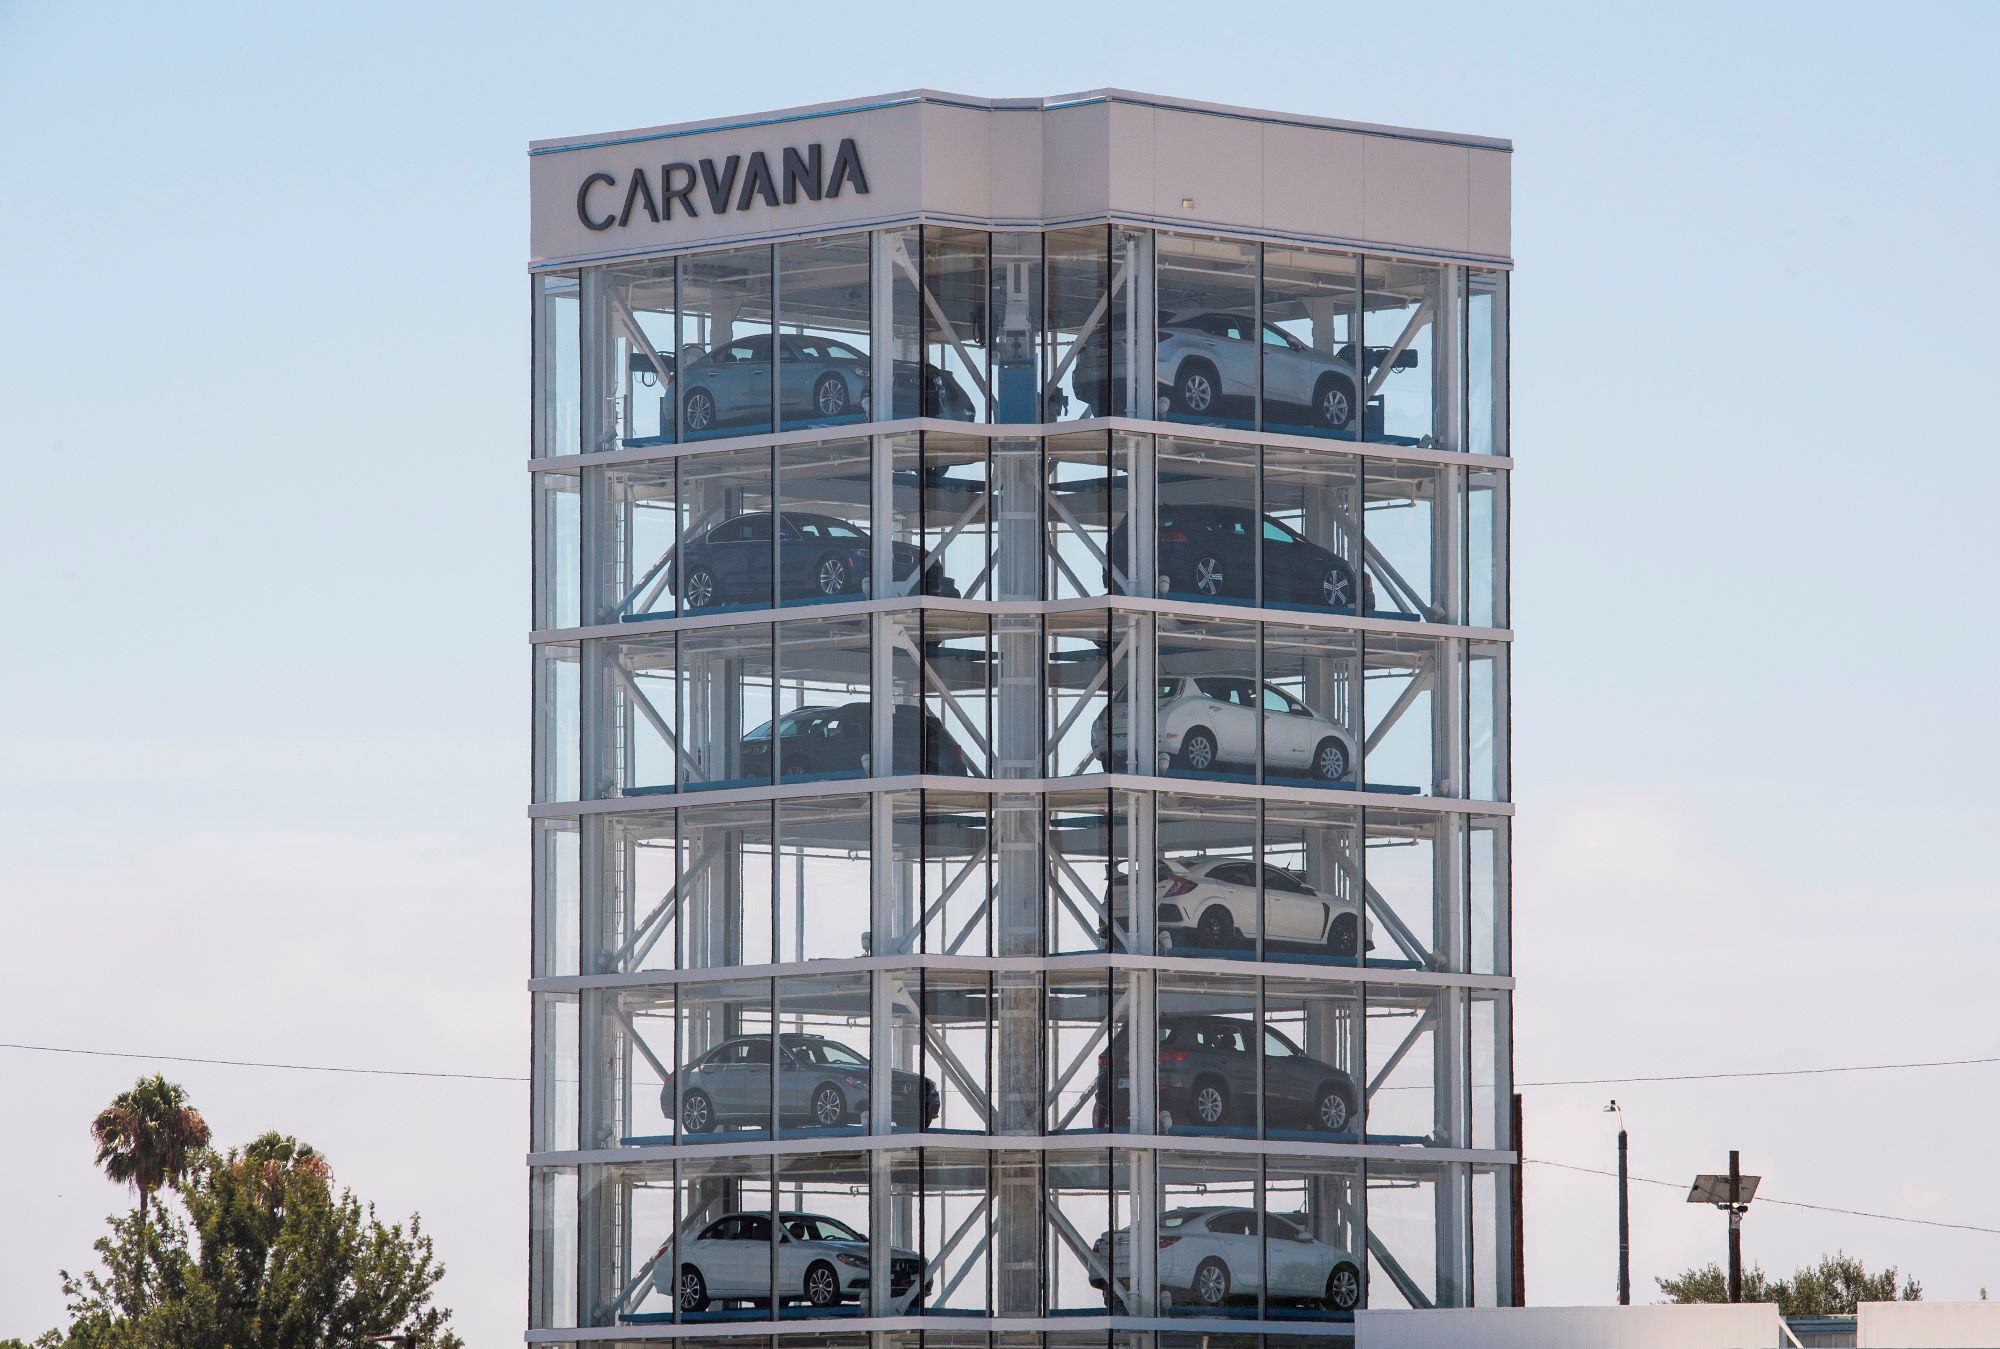 The Carvana building with multiple cars inside.